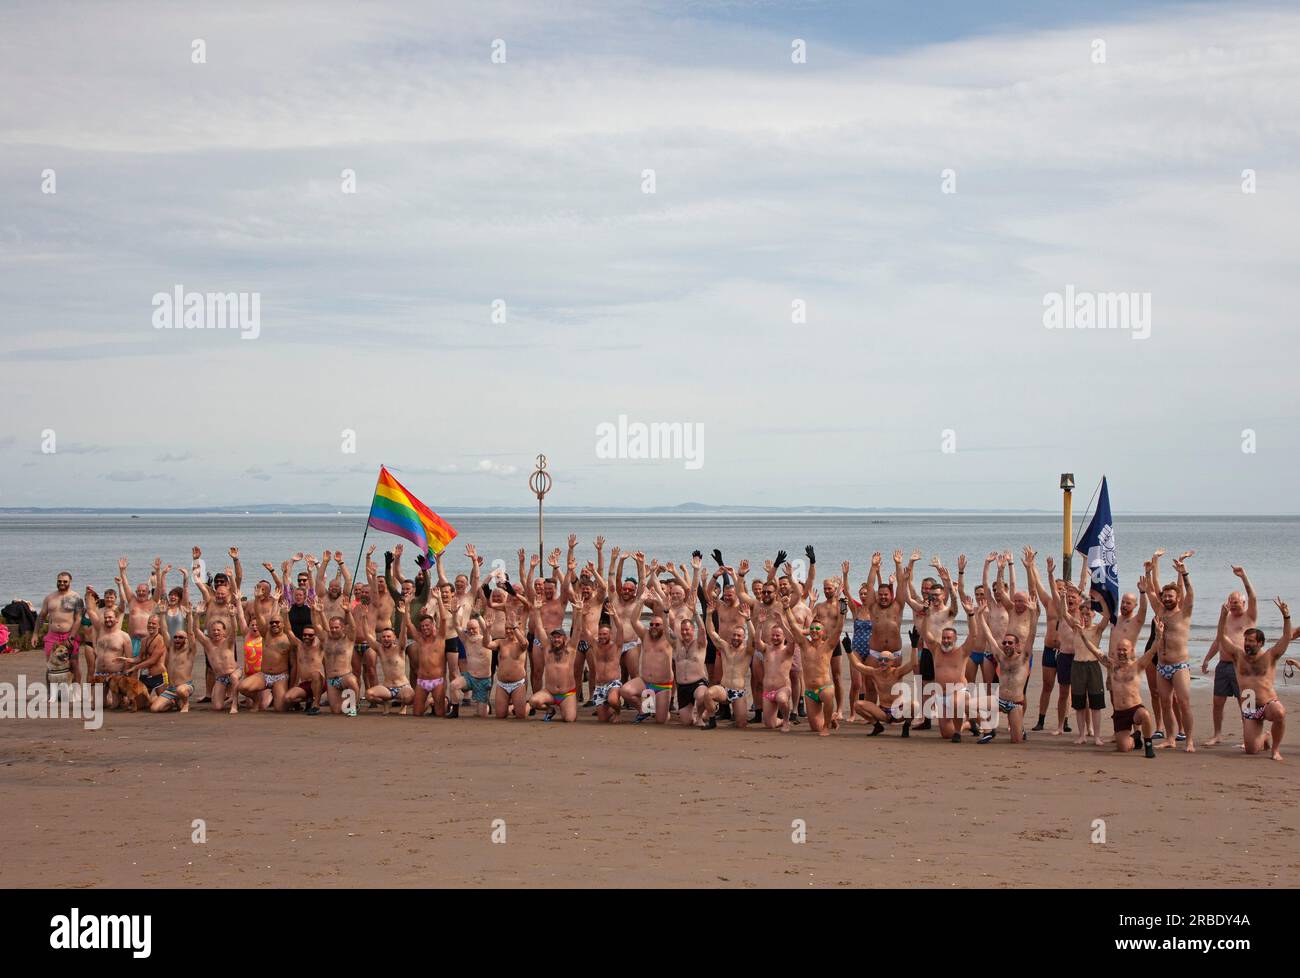 Portobello, Edinburgh, Scotland, UK. 09 July 2023, temperature 20 degrees for those taking exercise on the sandy beach and in the Firth of Forth. Pictured: Edinburgh Blueballs and friends with their annual Porty Pride dip on the final day the Portobello Pride weekend. Credit: Scottishcreative/alamy live news. Stock Photo